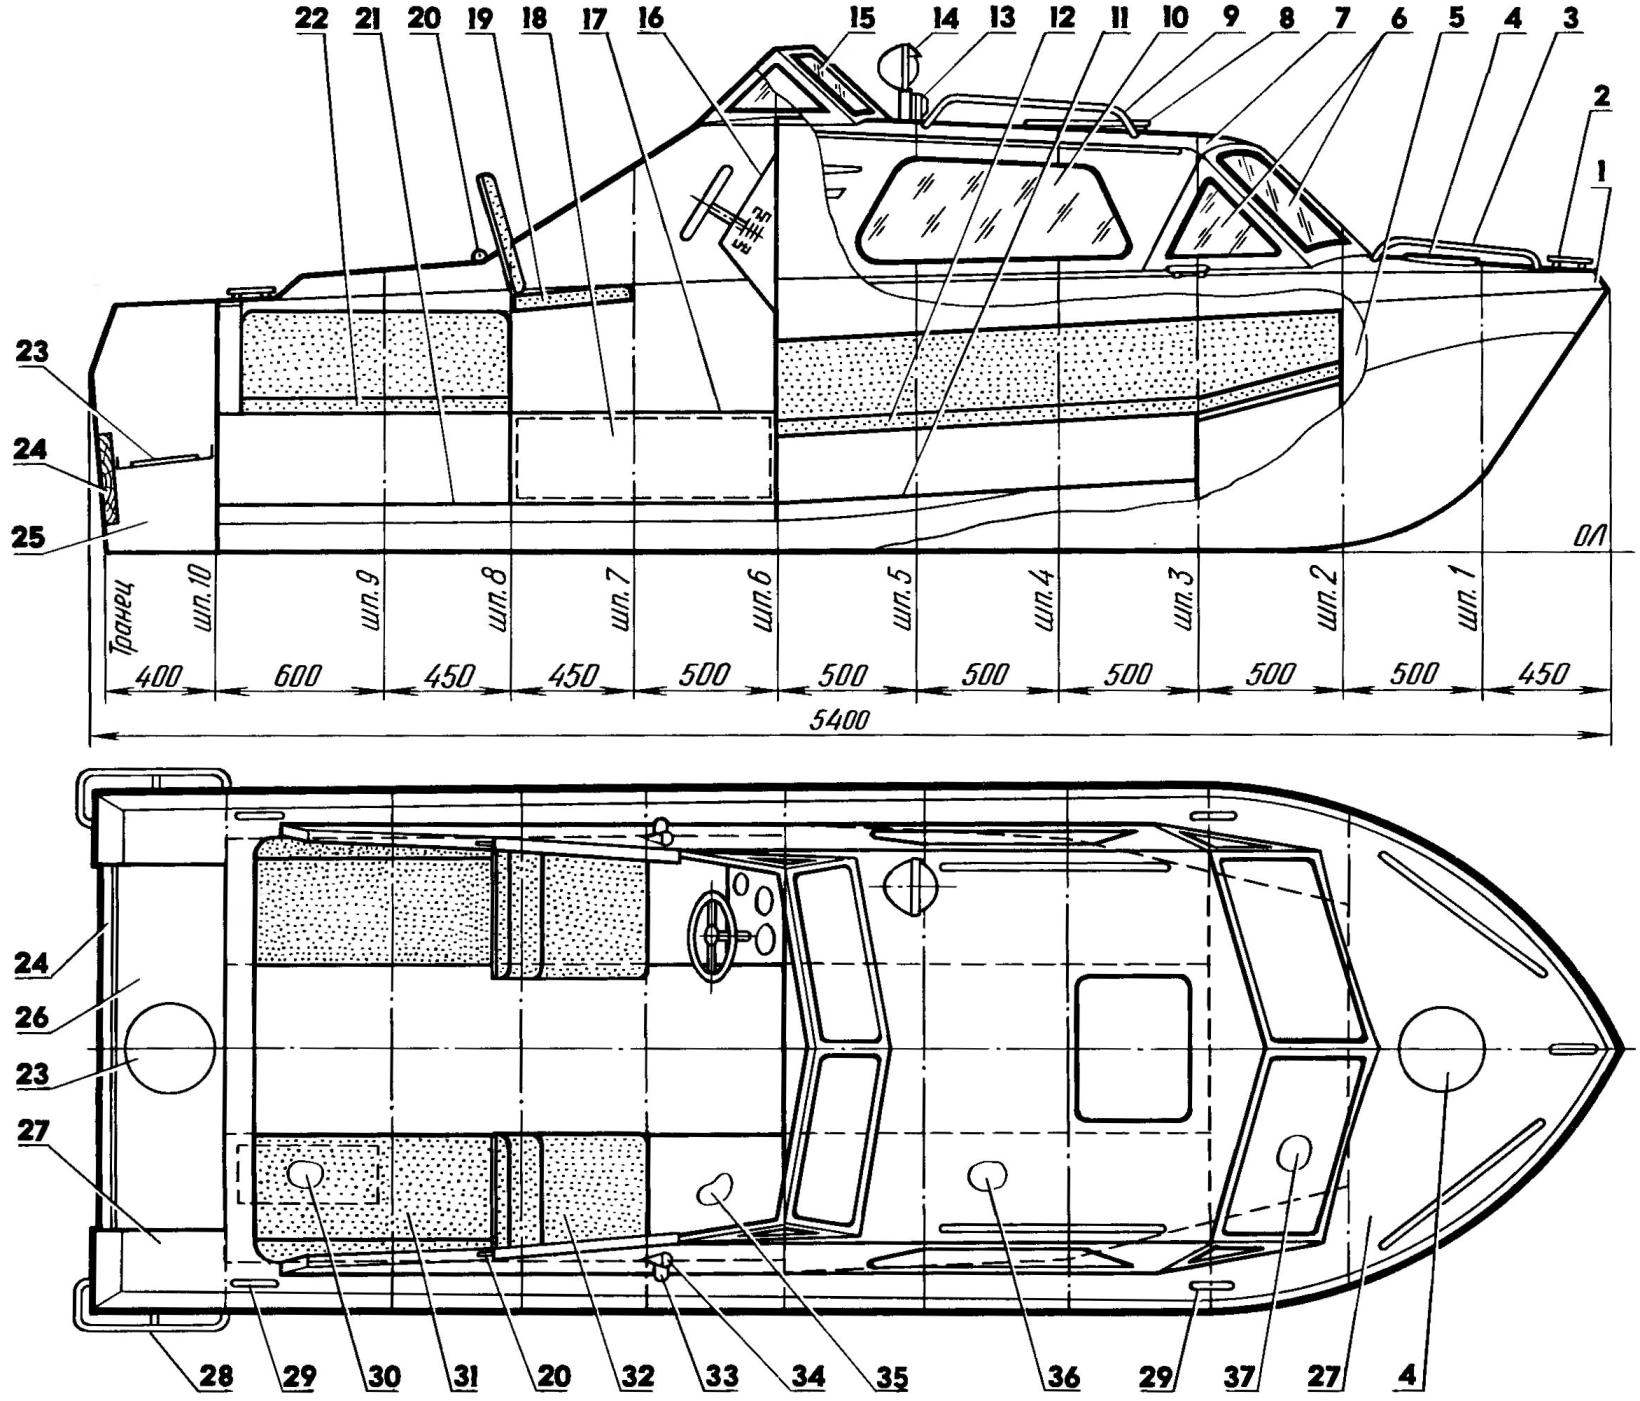 Fig. 2. The layout of the boat